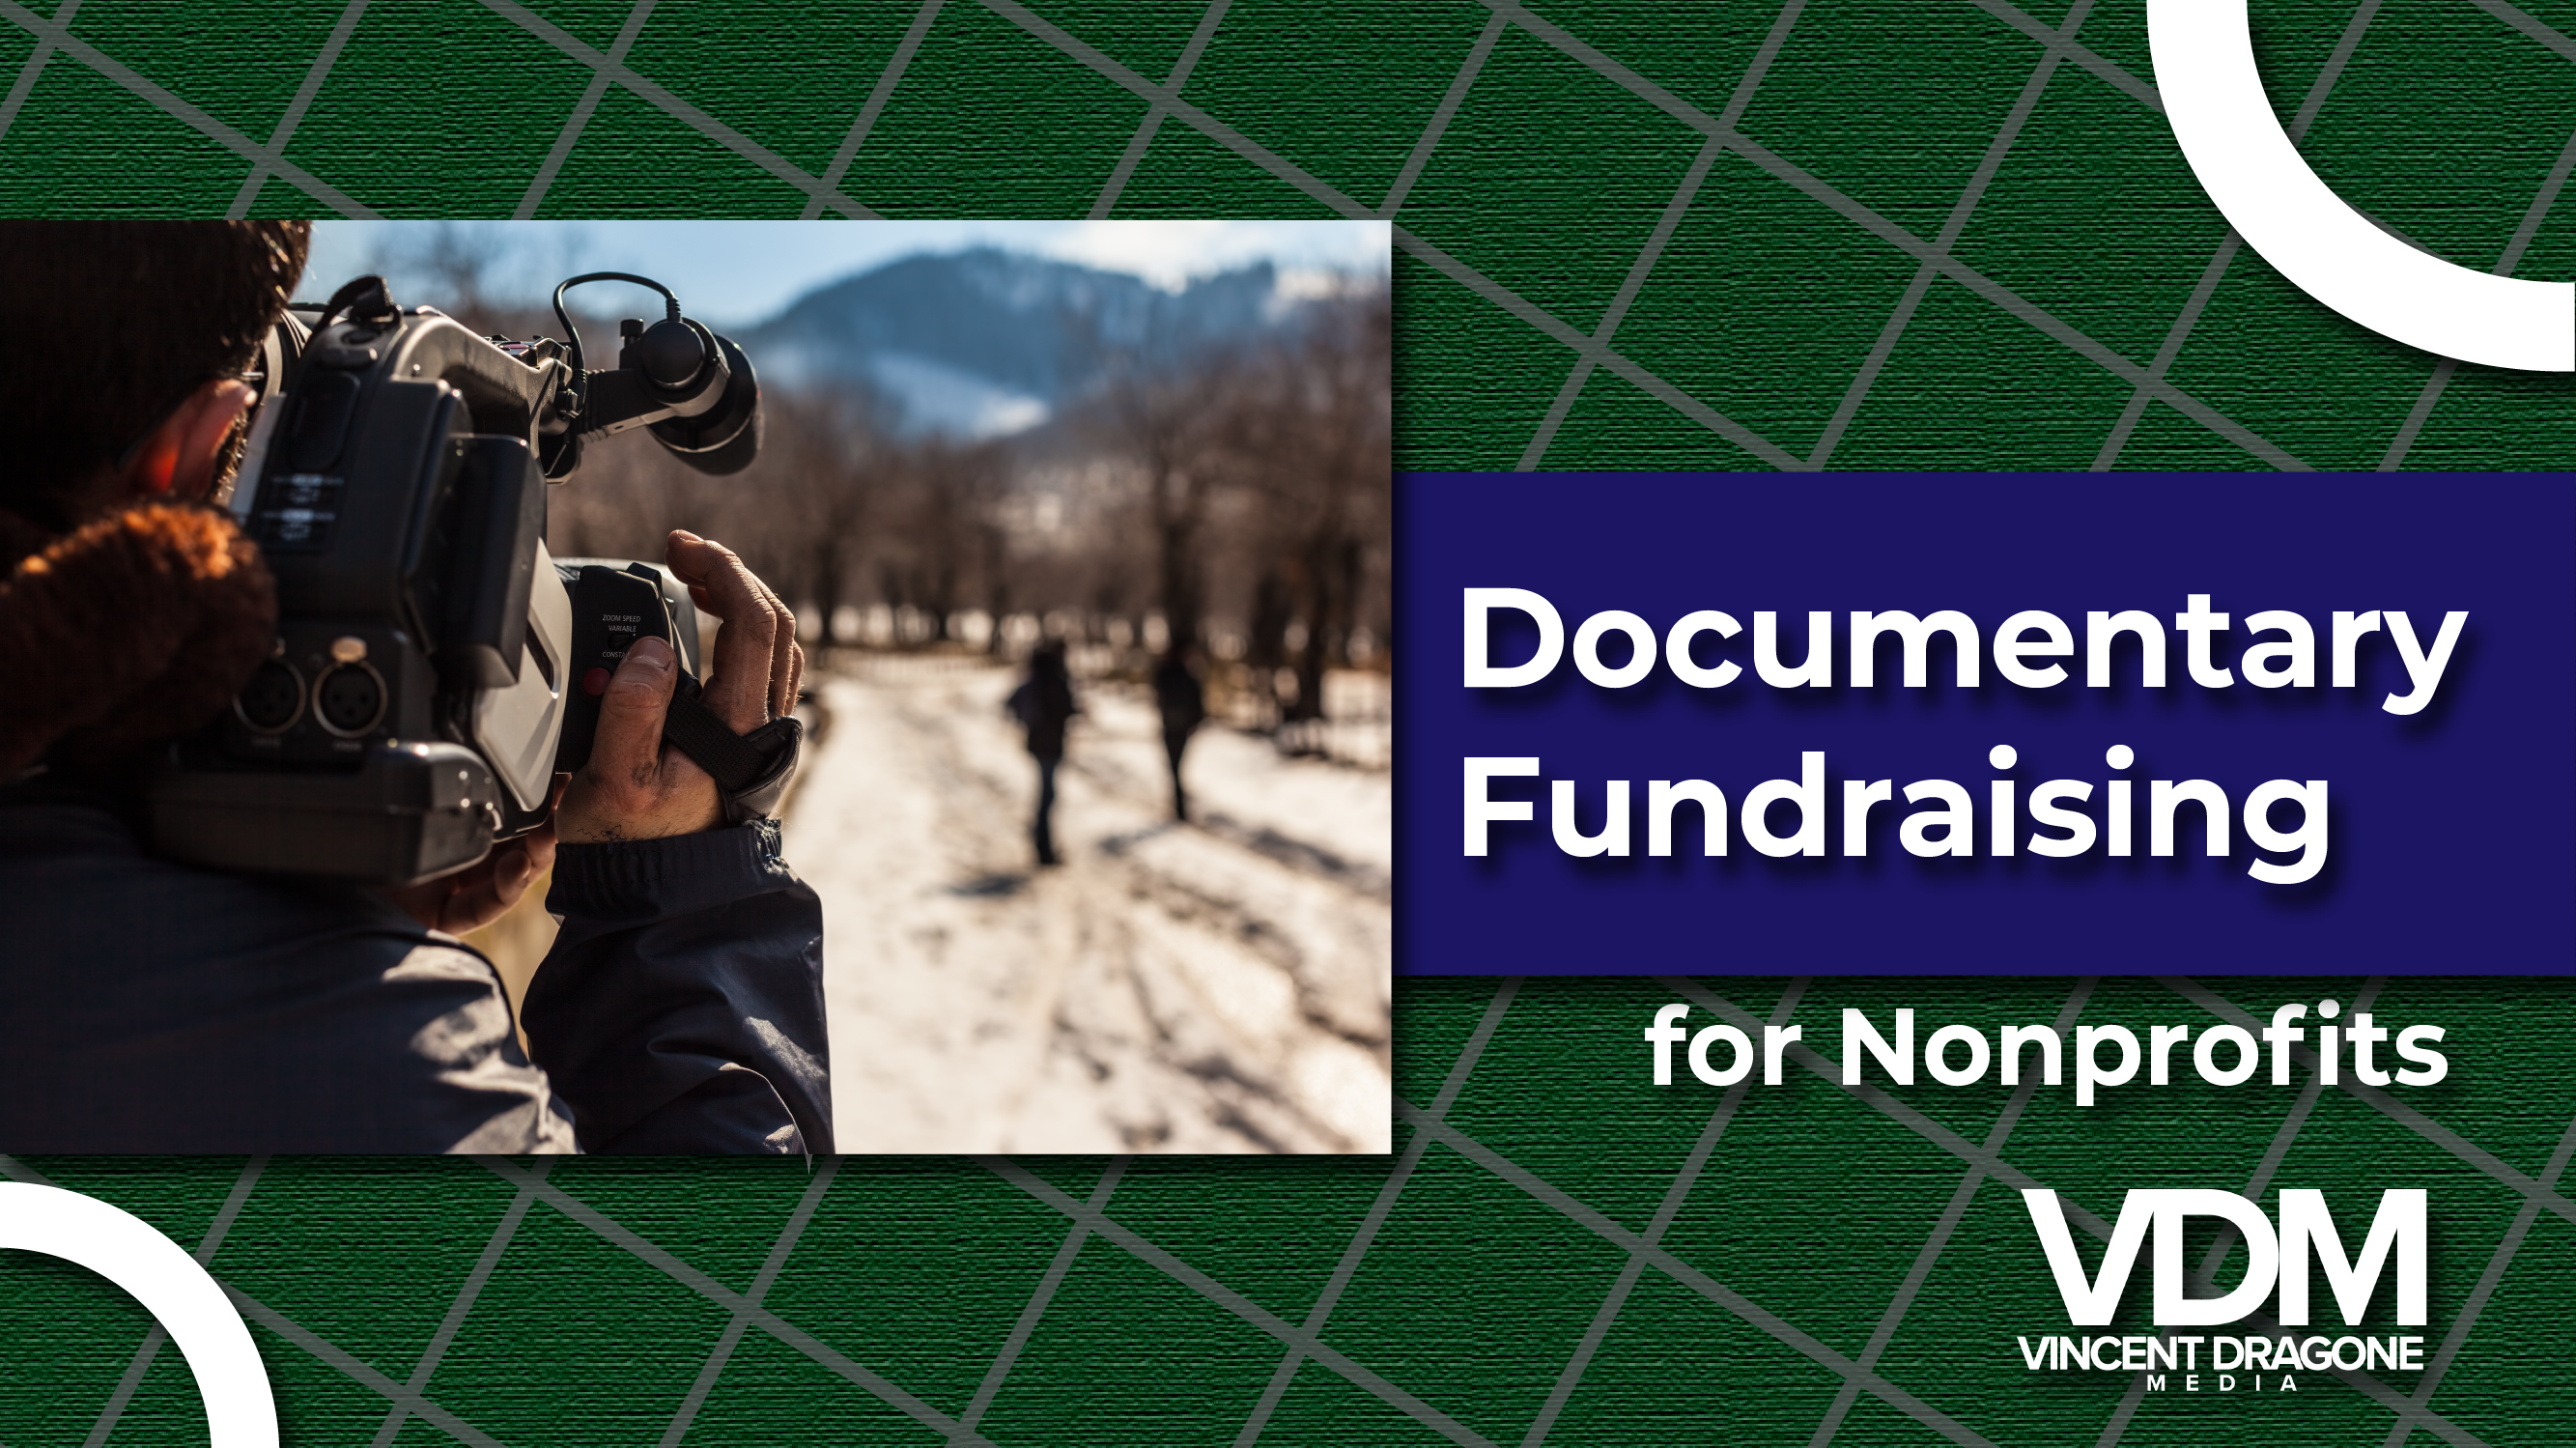 Funding a Nonprofit Documentary